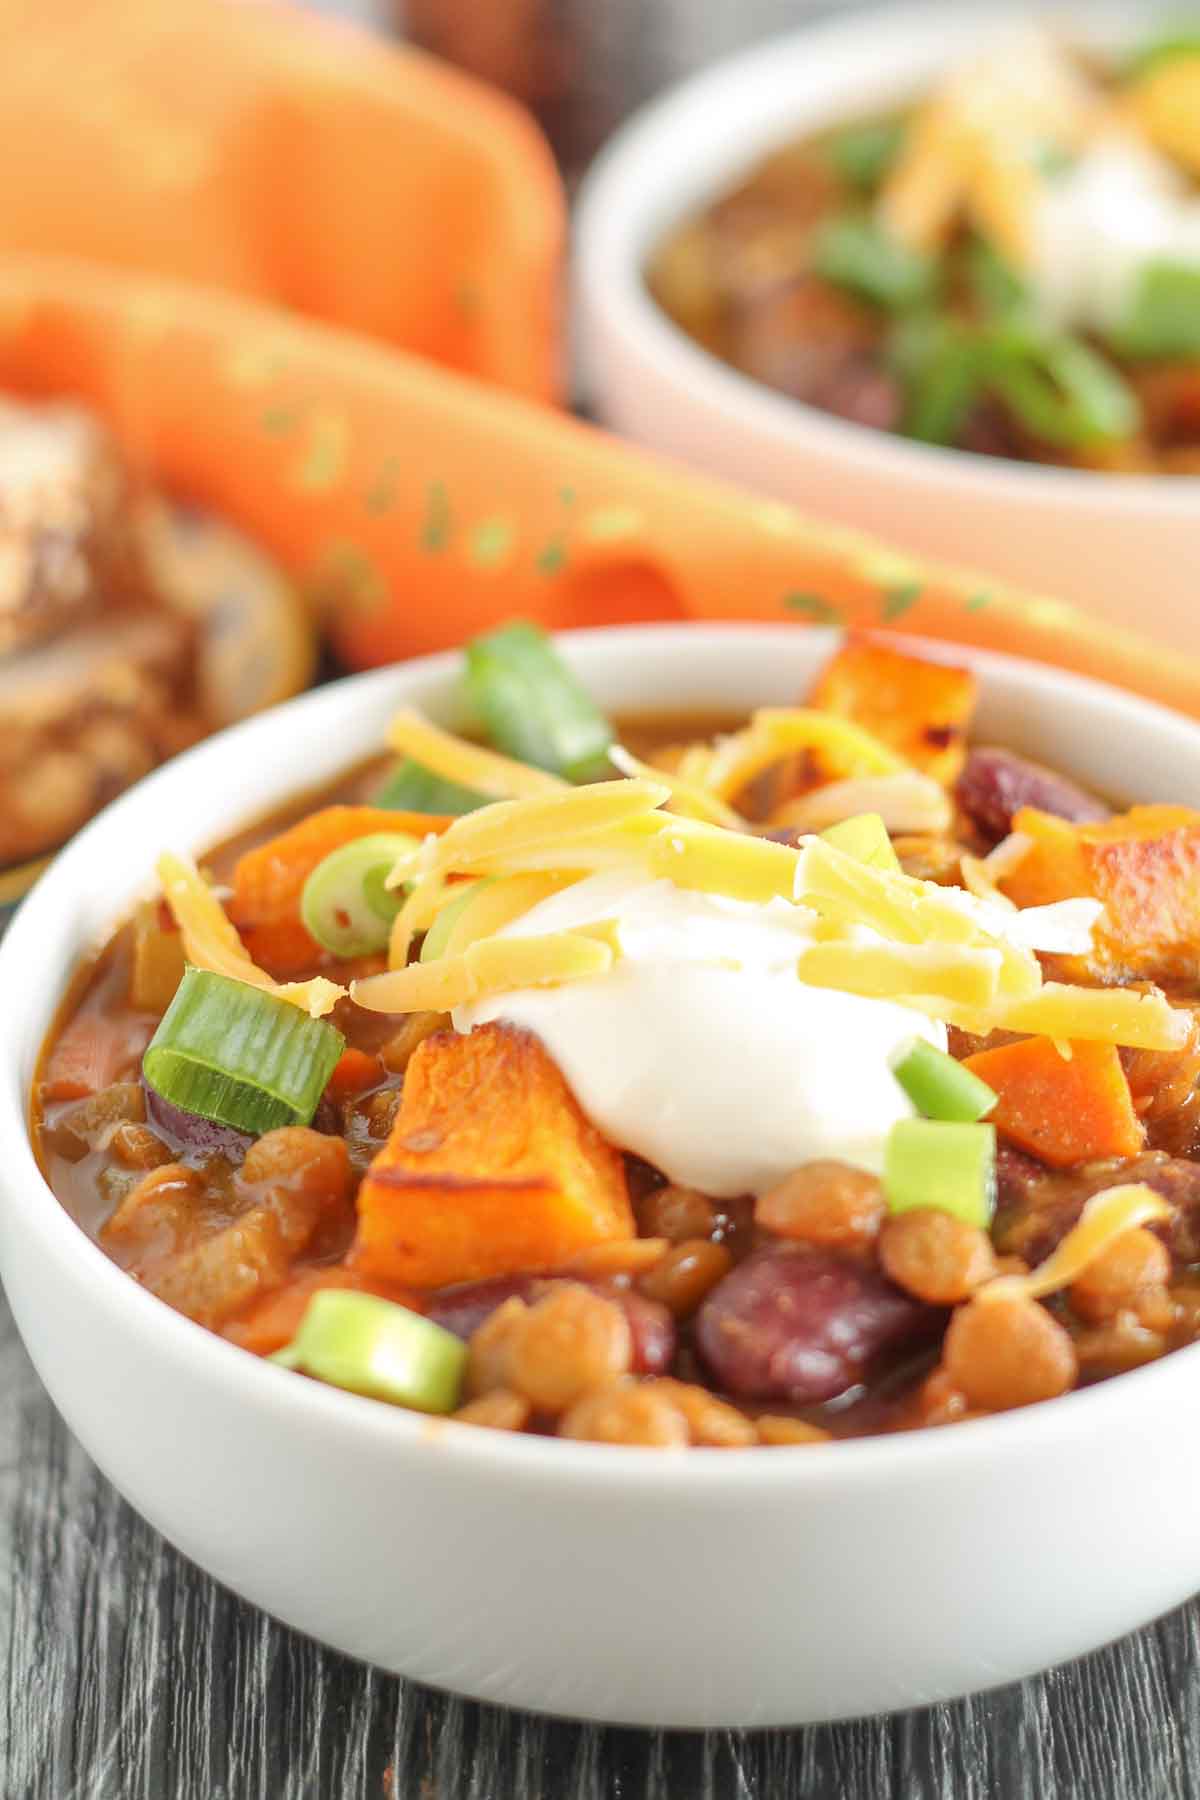 vegan chili with lentils and roasted butternut squash garnished with green onions